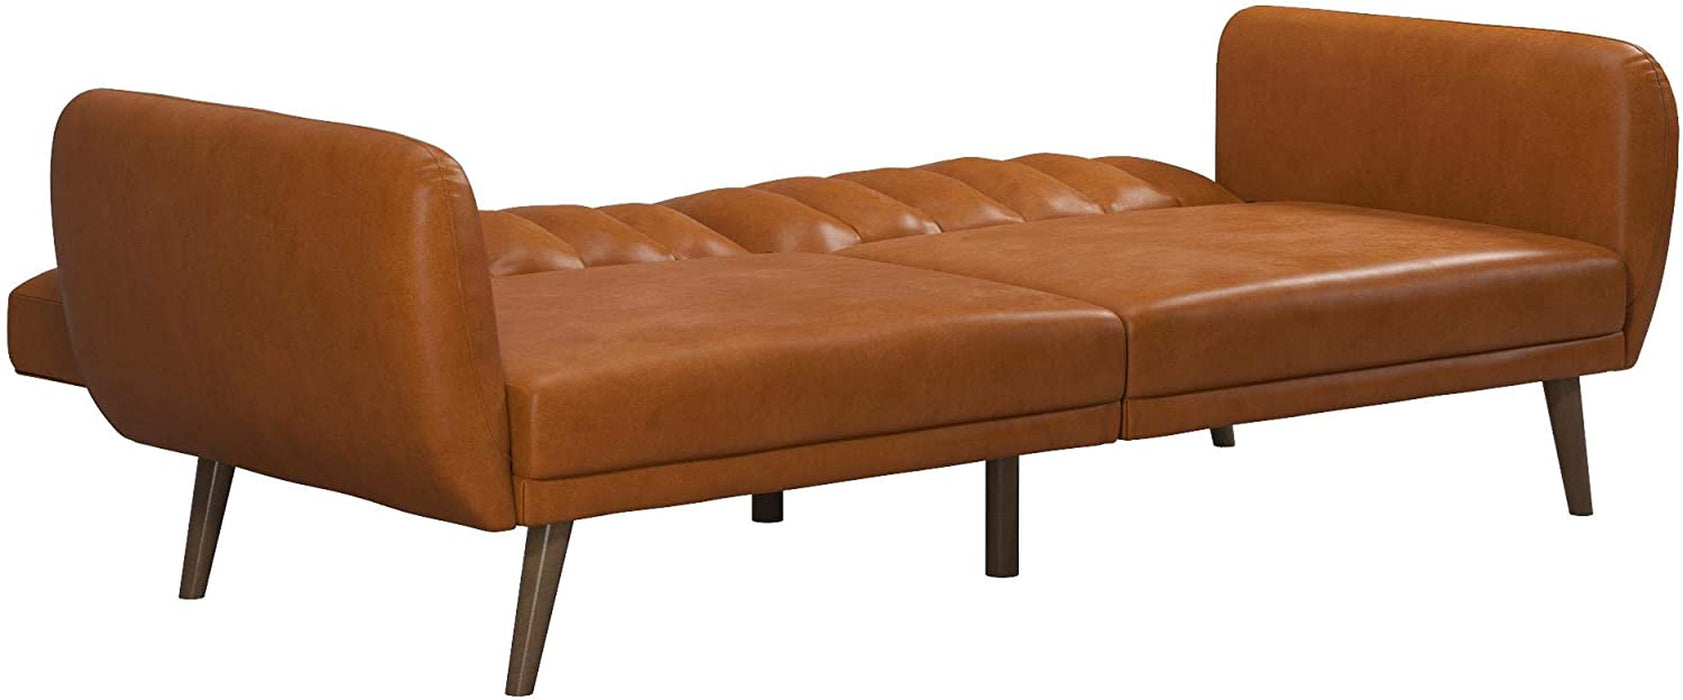 Convertible Camel Faux Leather Sofa - Brittany Futon